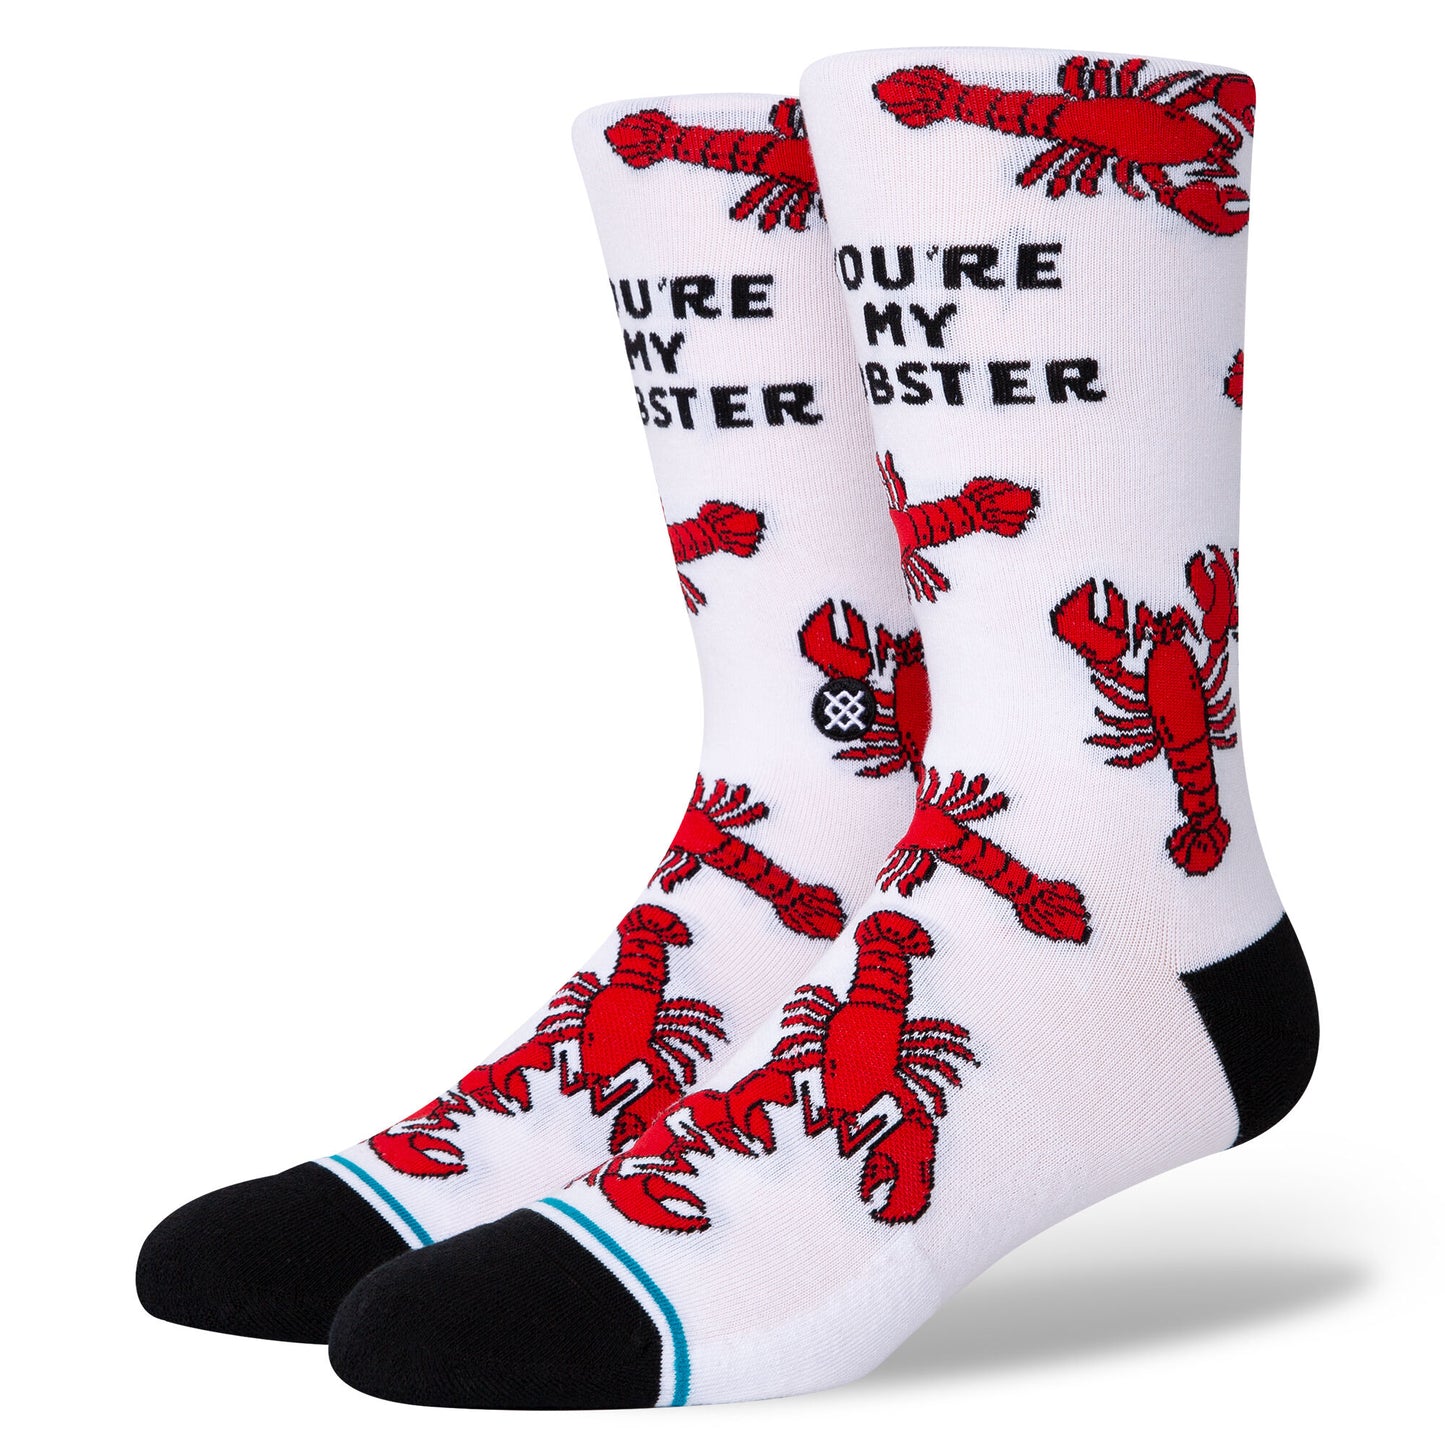 You're My Lobster - White - LG